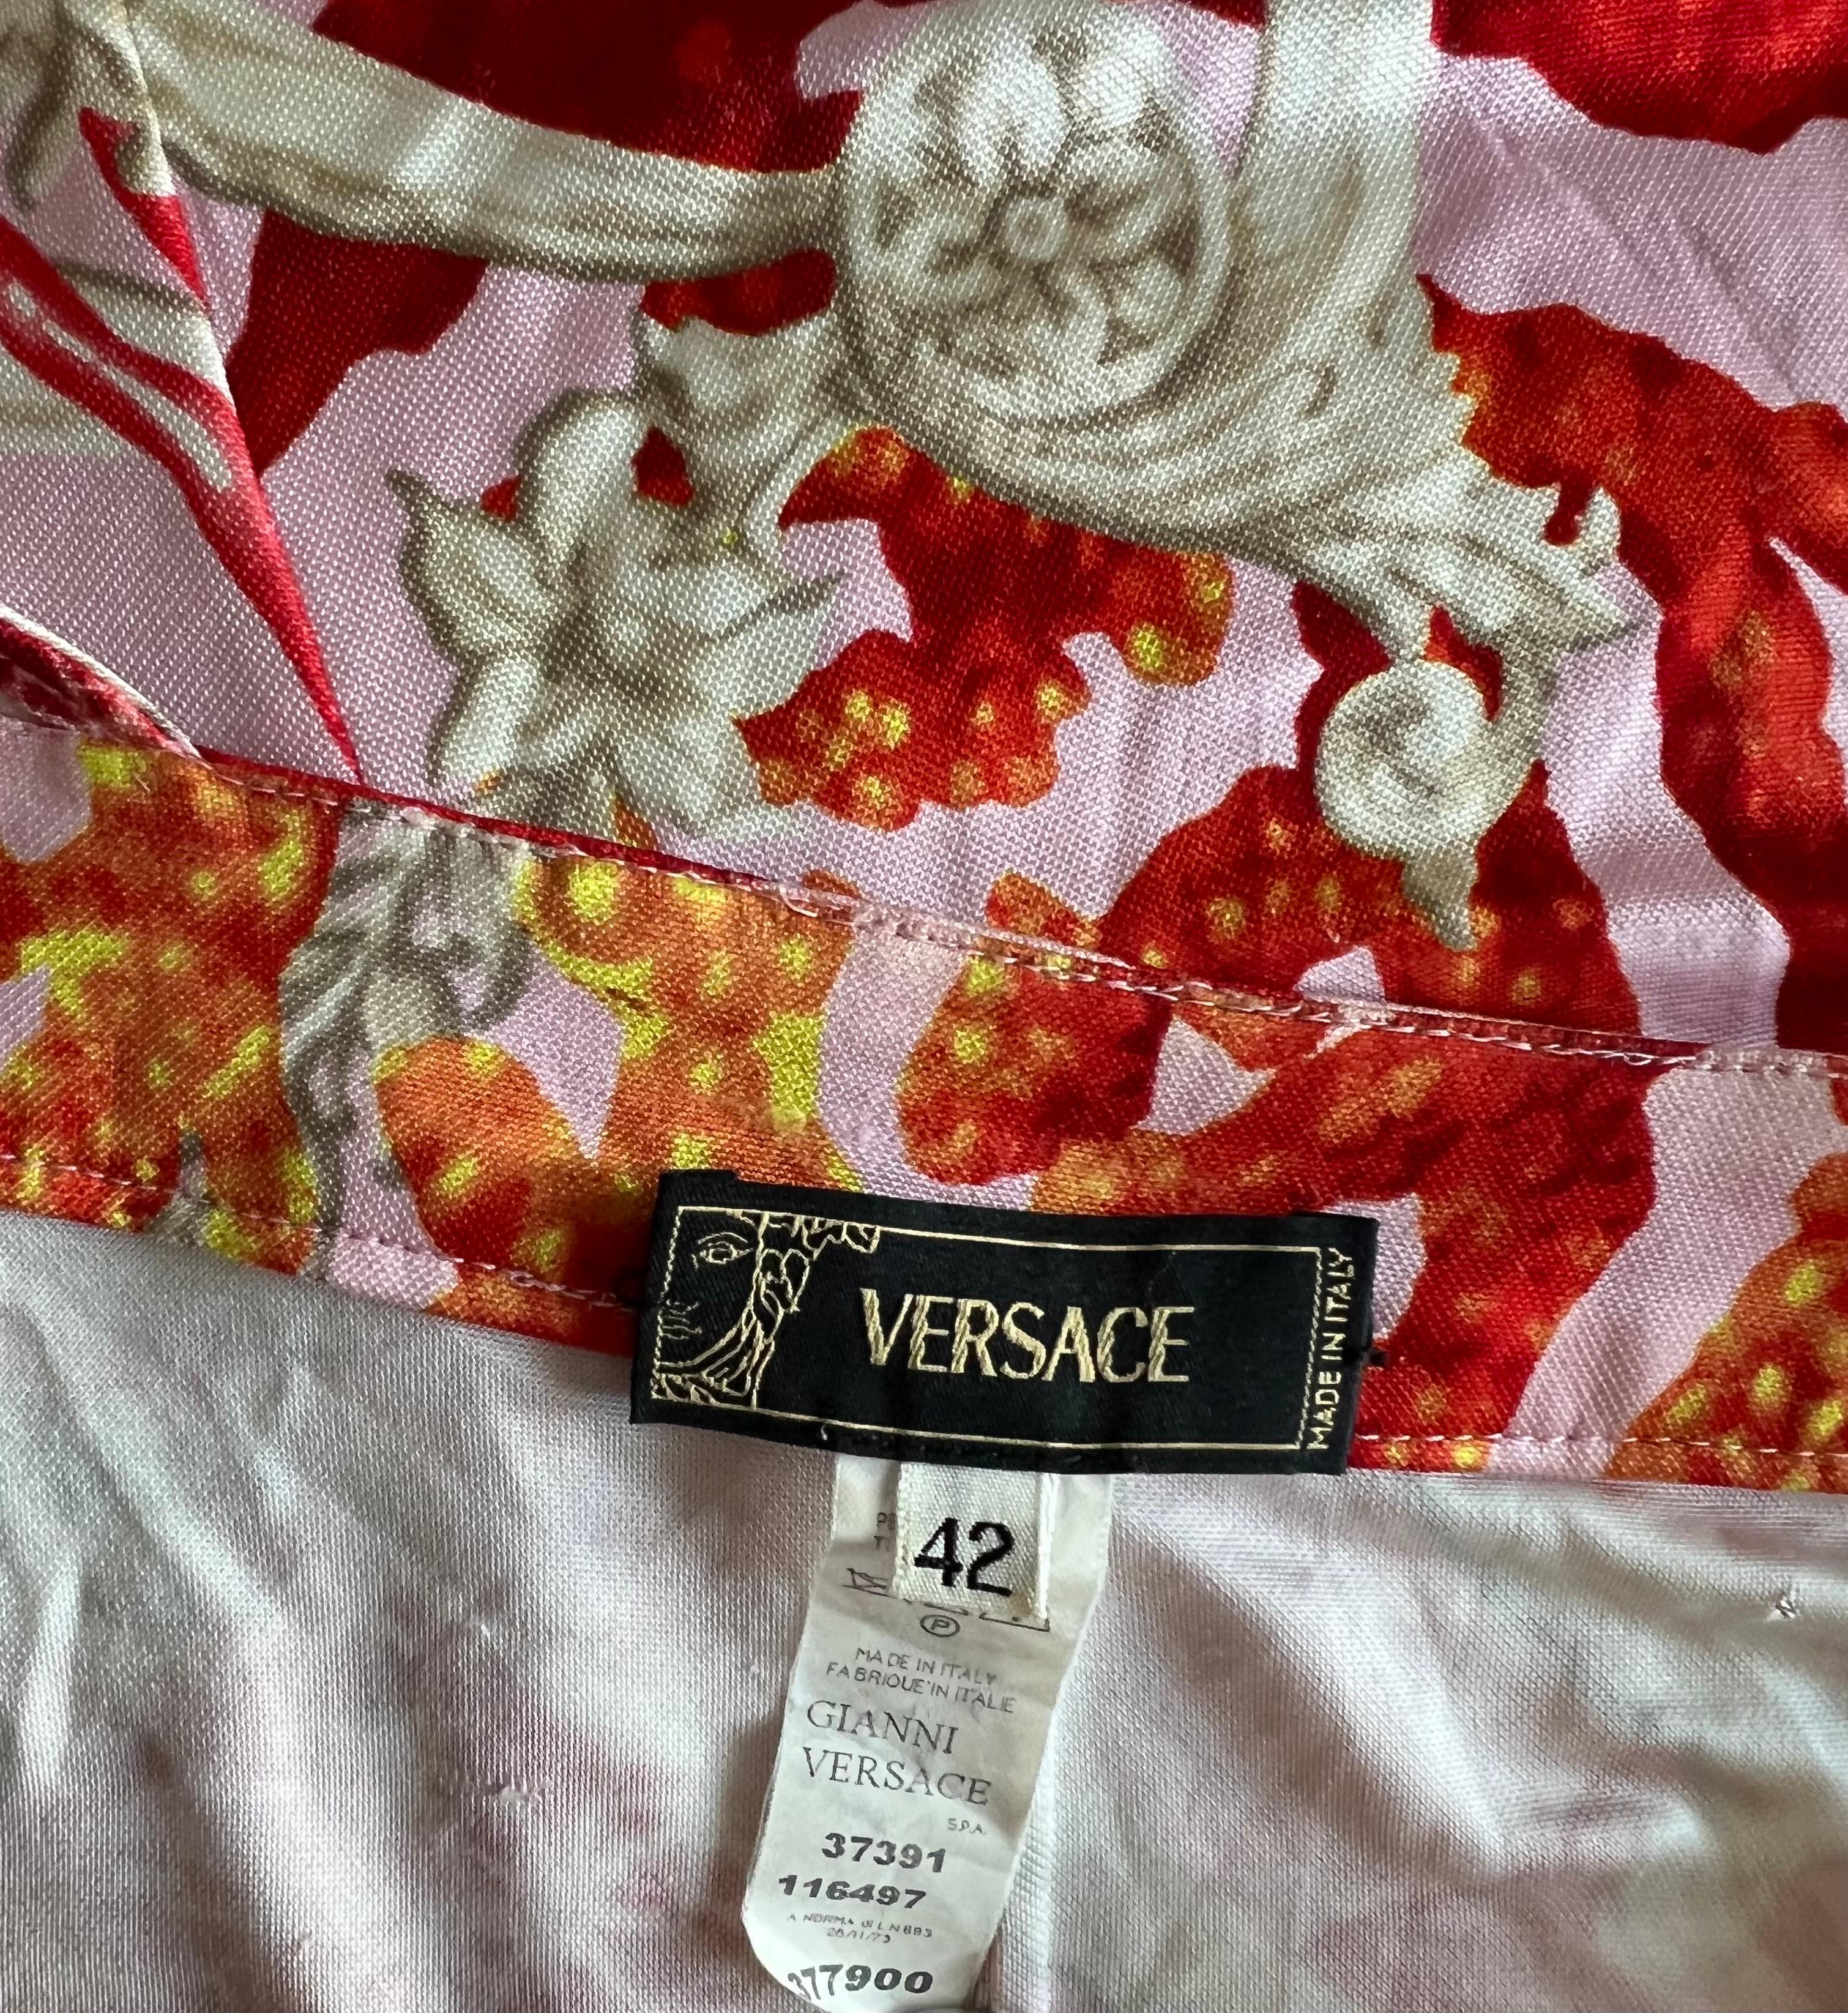 Versace S/S 2005 Plunging Neckline Backless Seashell Print Belted Wrap Dress For Sale 3